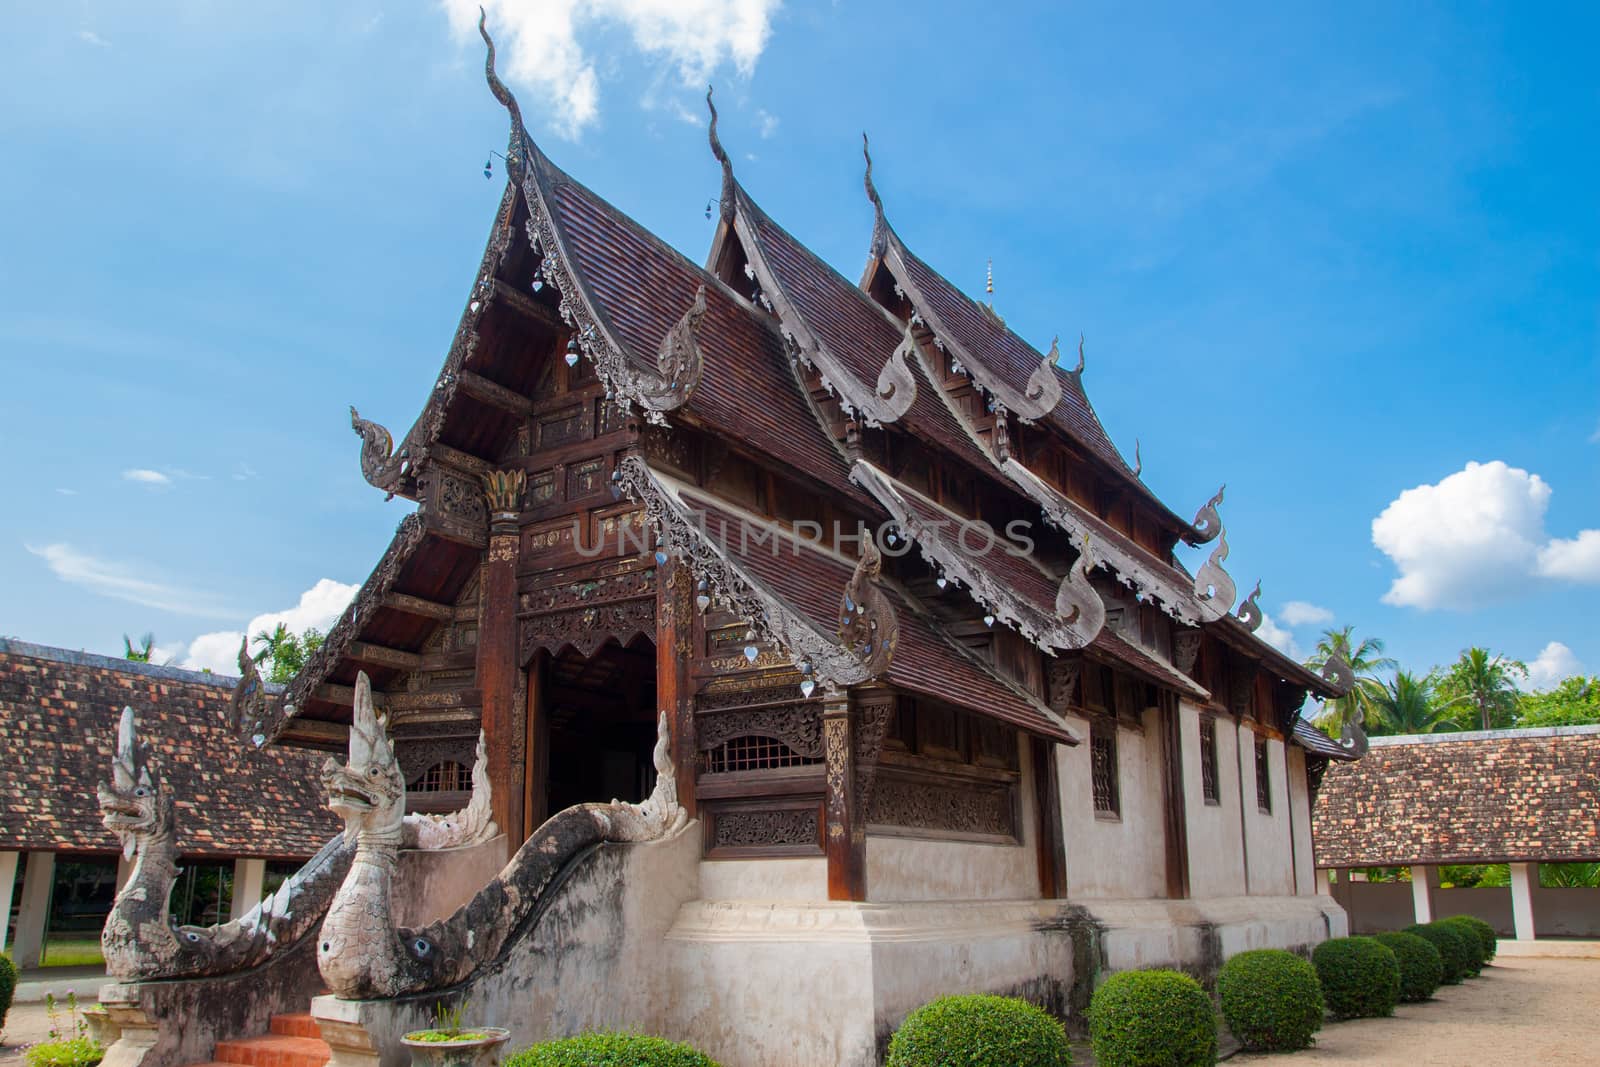 Wat Ton Kain 700 years or Inthrawat temple , popular famous tourist attraction landmark in Chiangmai. Old wooden Thai temple in Chiang Mai Thailand by asiandelight